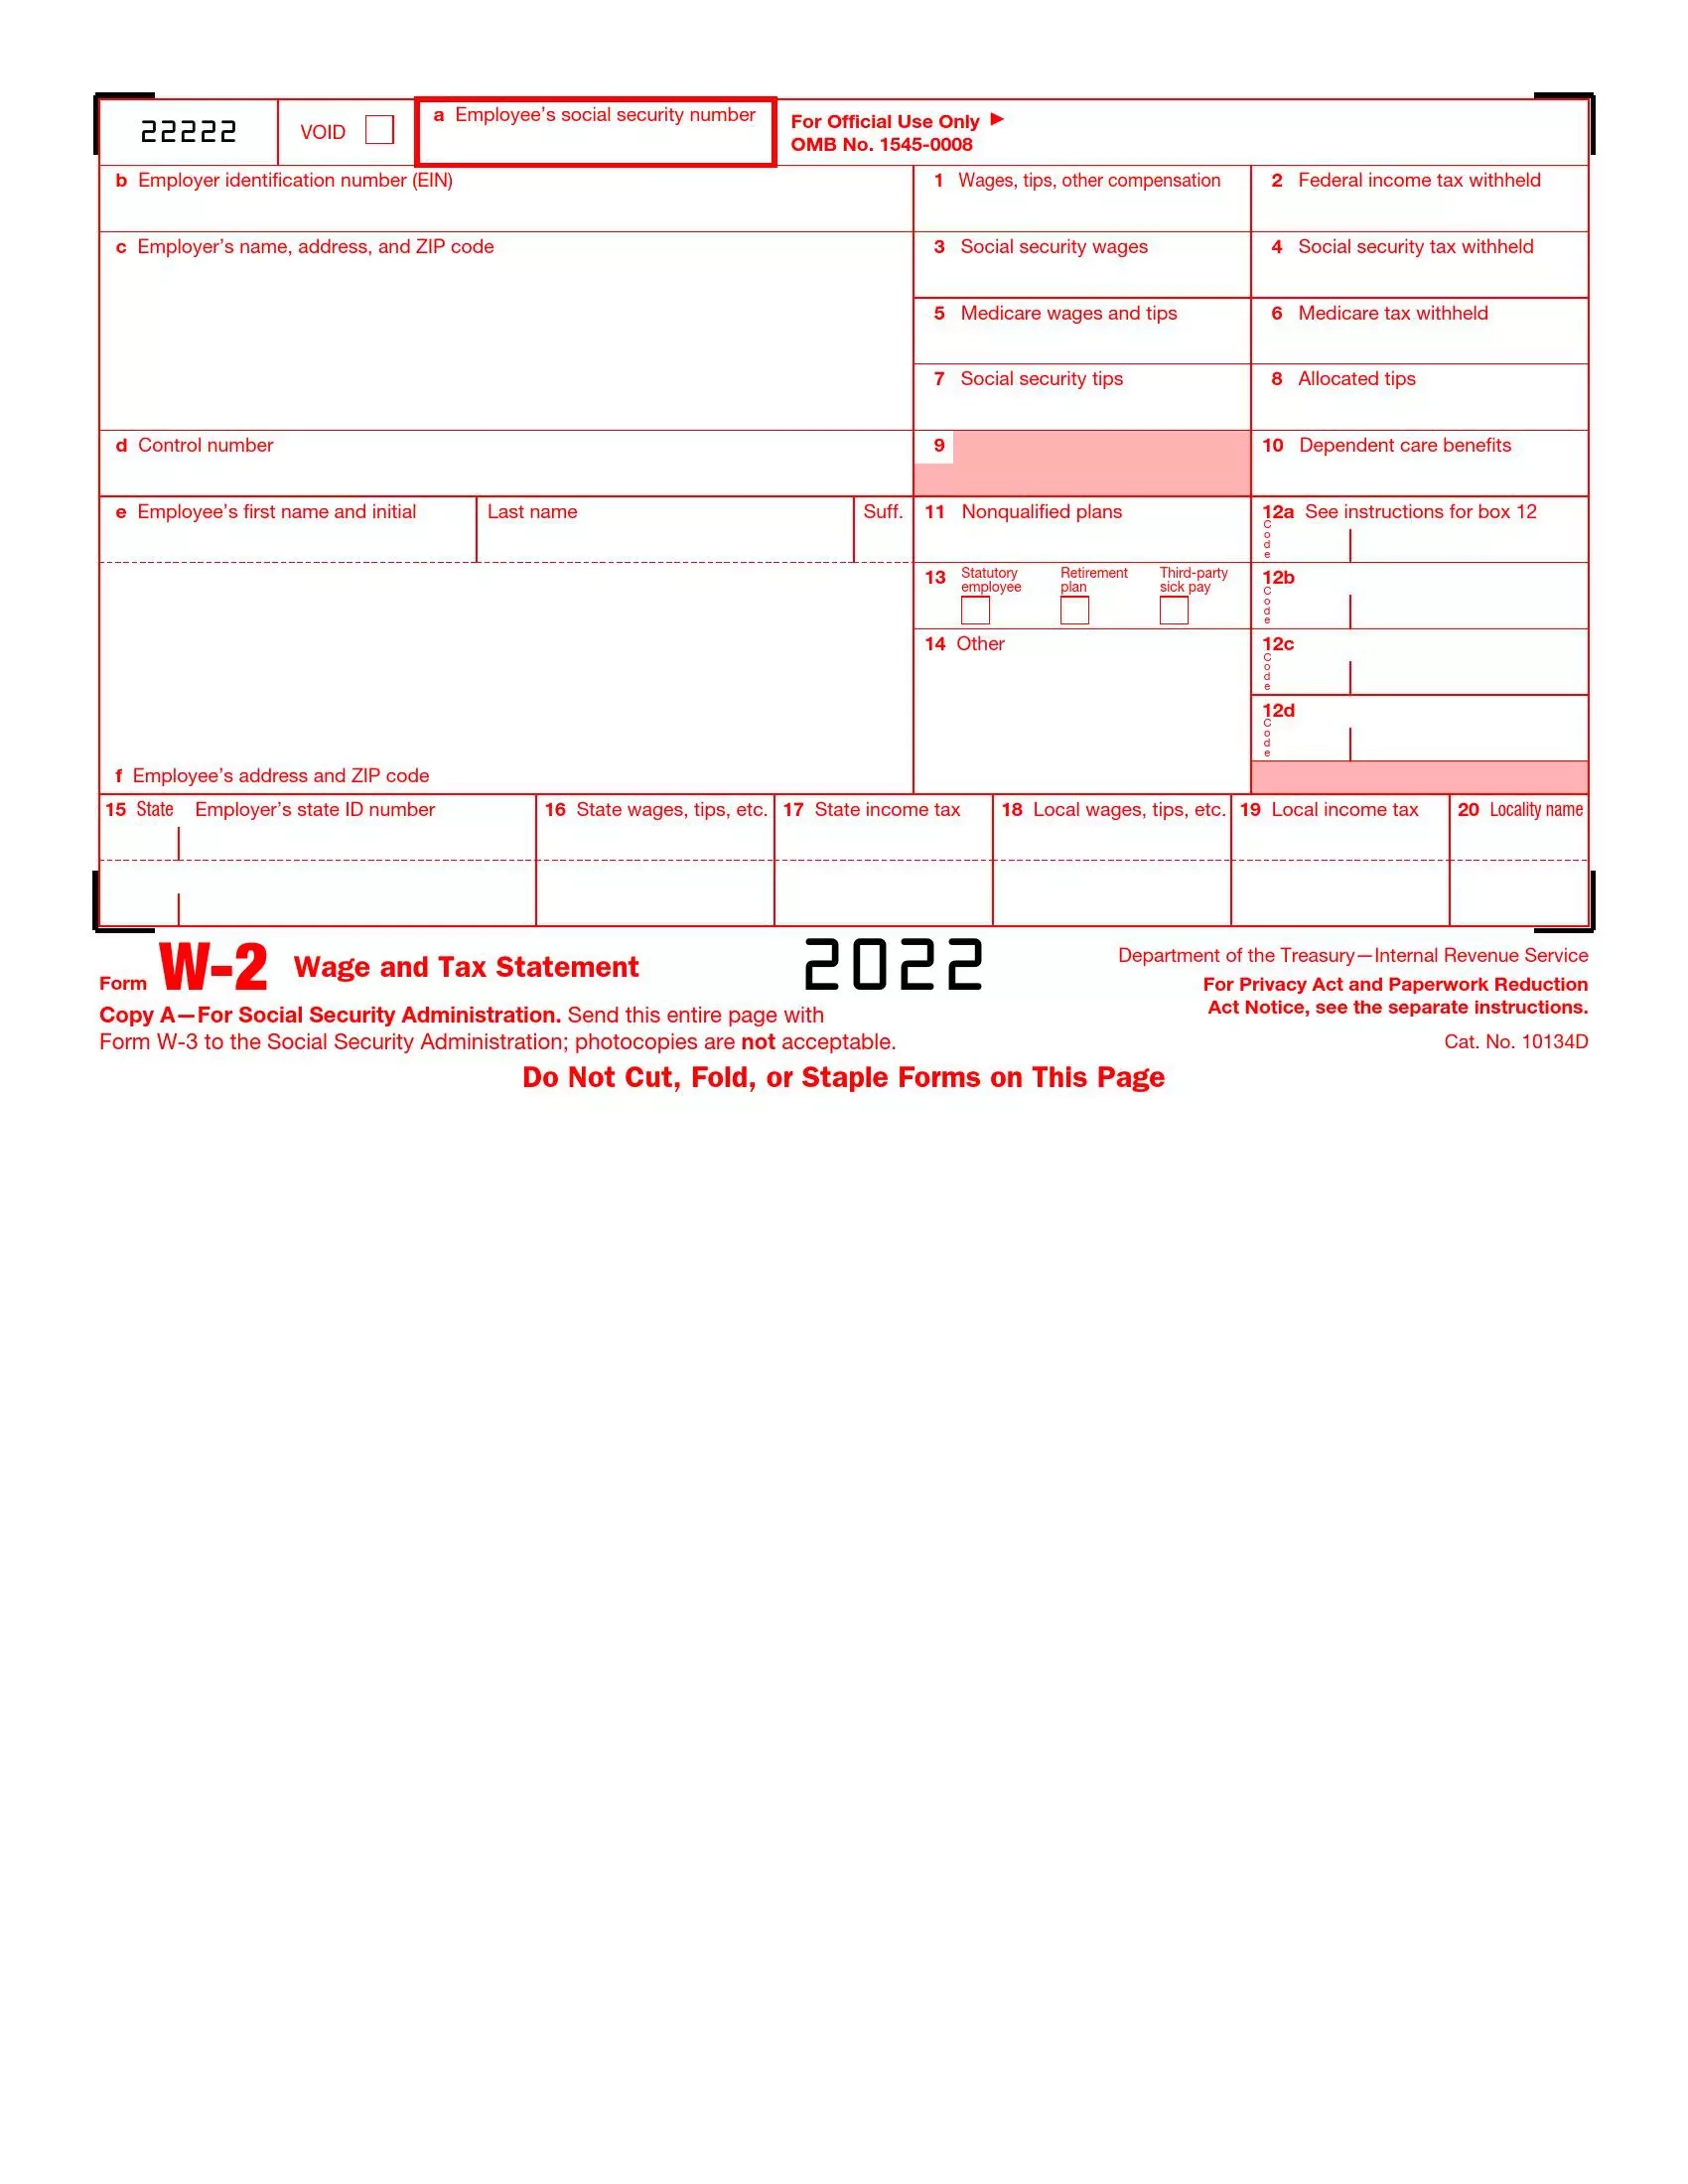 Irs Form W-2 ≡ Fill Out Printable Pdf Forms Online pertaining to Where Can I Get Blank W2 Forms